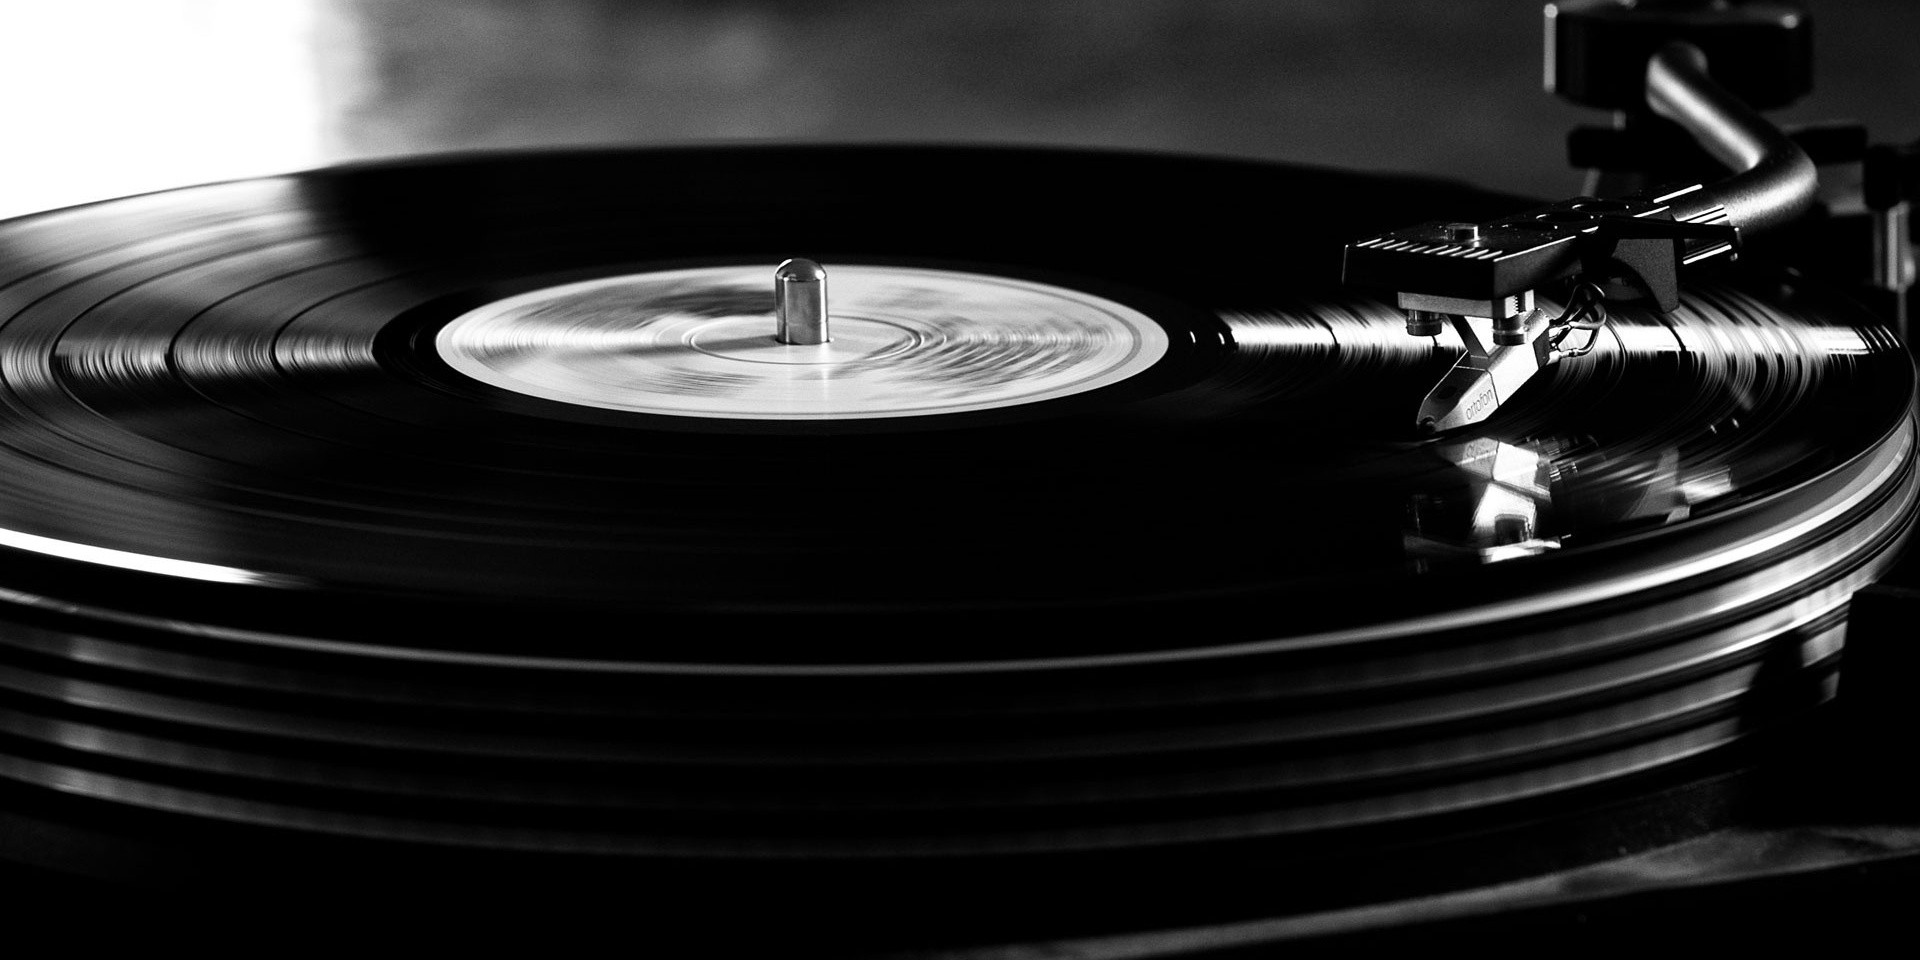 "High definition" vinyl could be a possibility as early as 2019